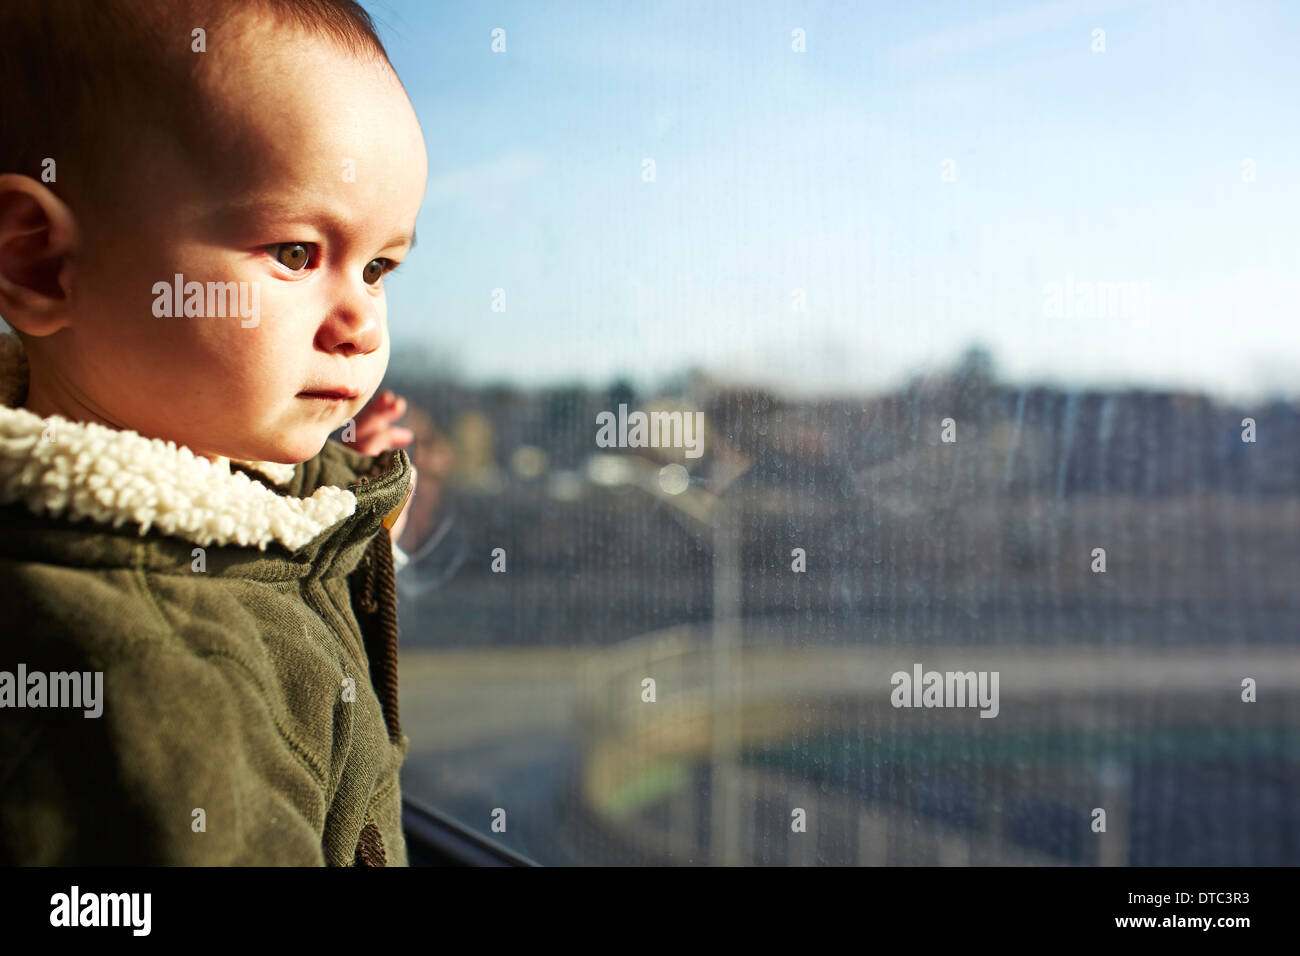 Close up of baby boy staring out of window Banque D'Images